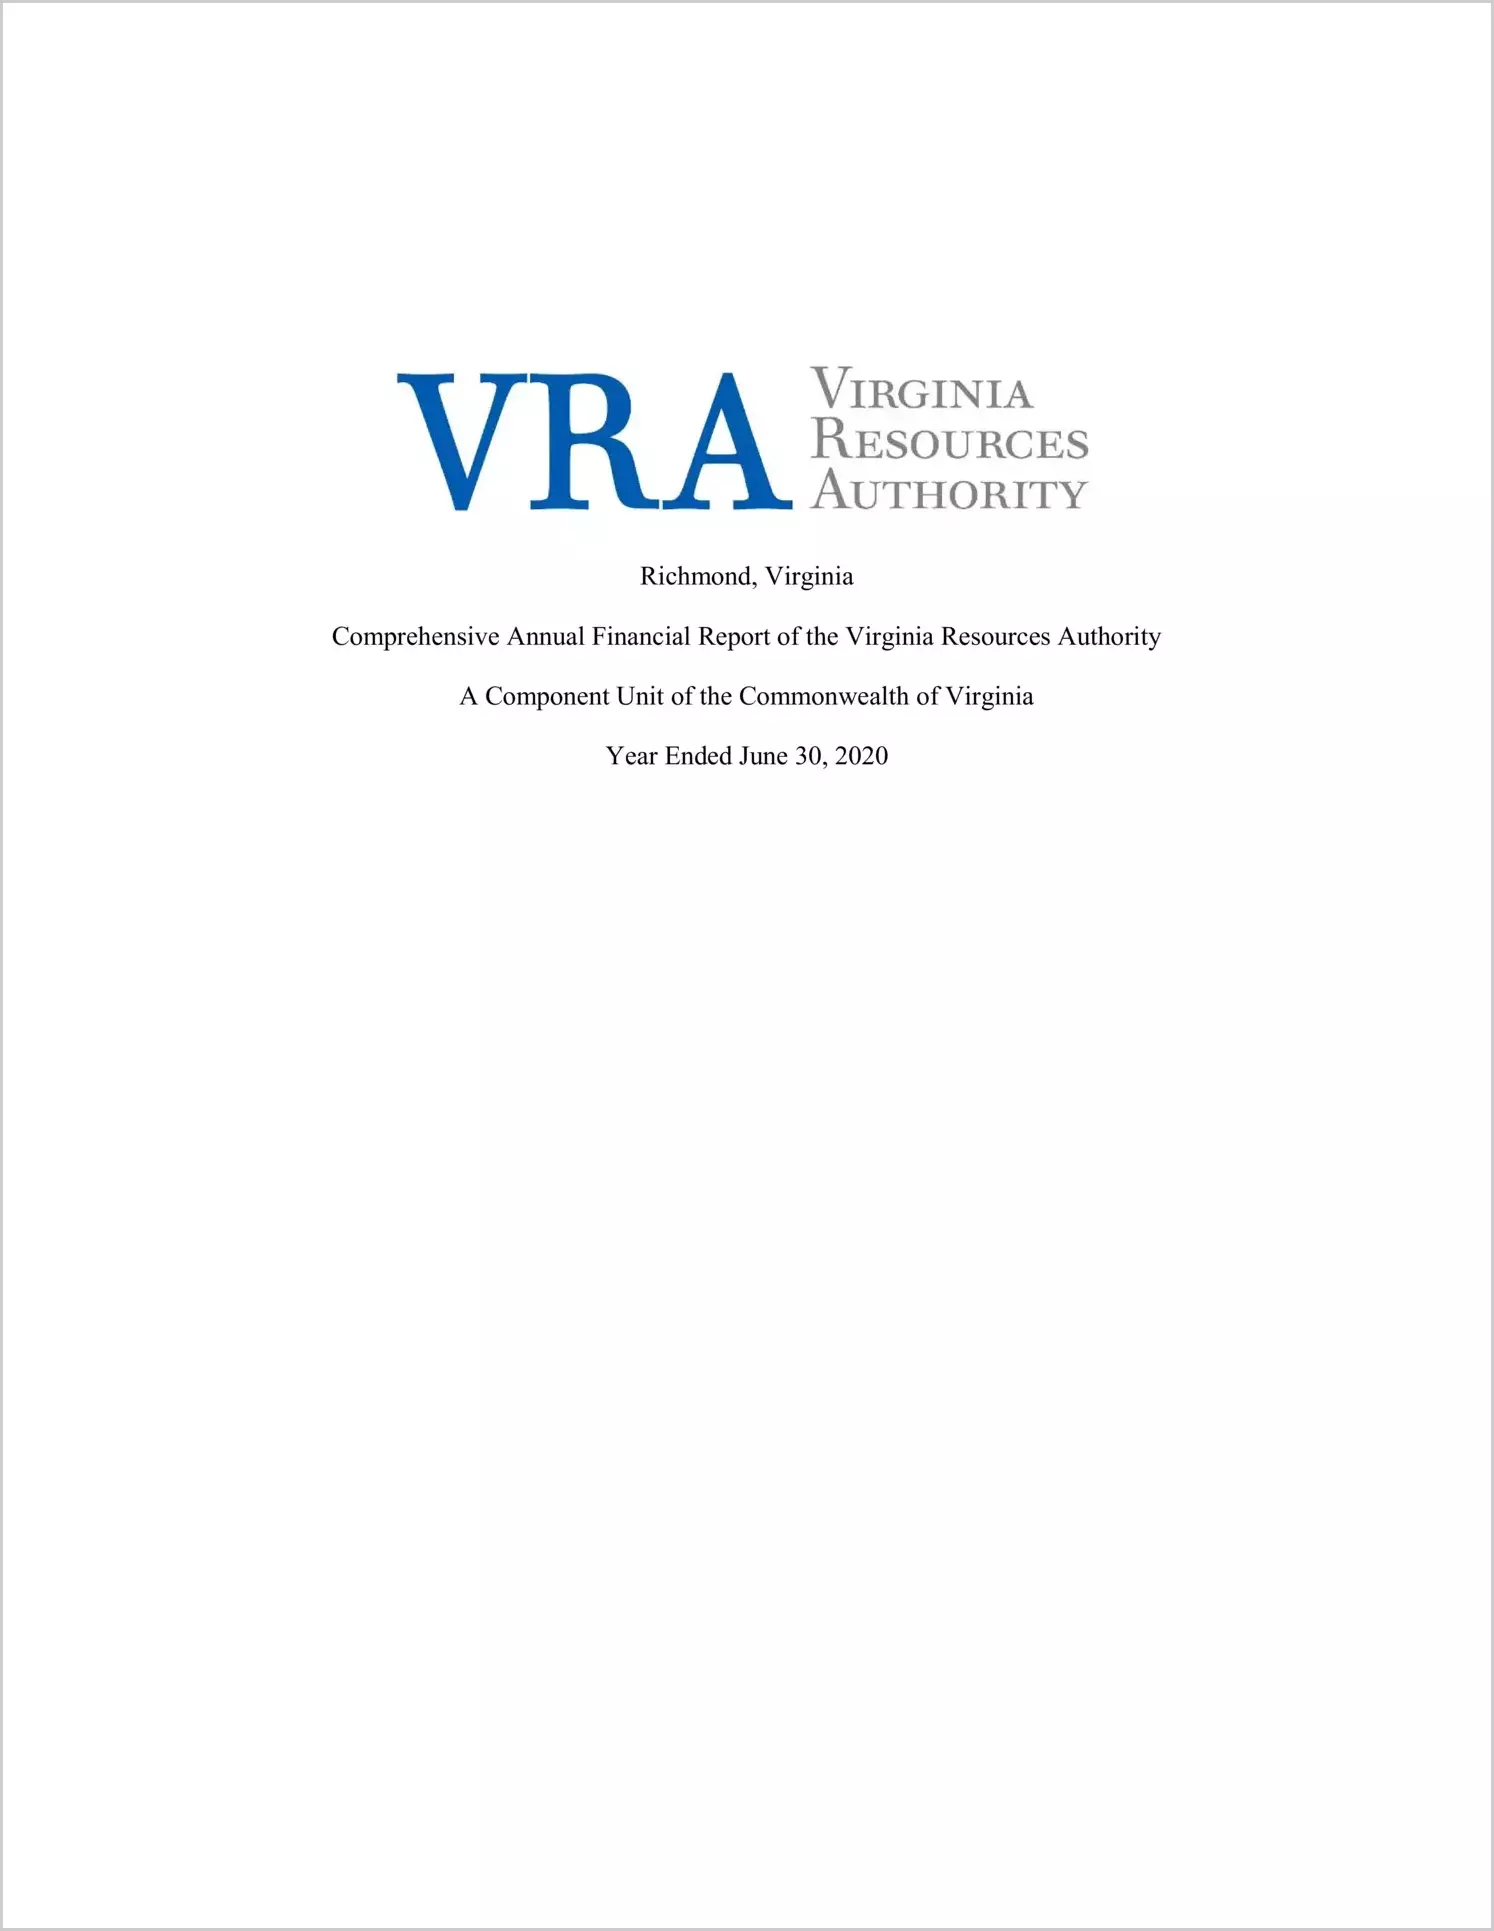 Virginia Resources Authority Financial Statements for the fiscal year ended June 30, 2020